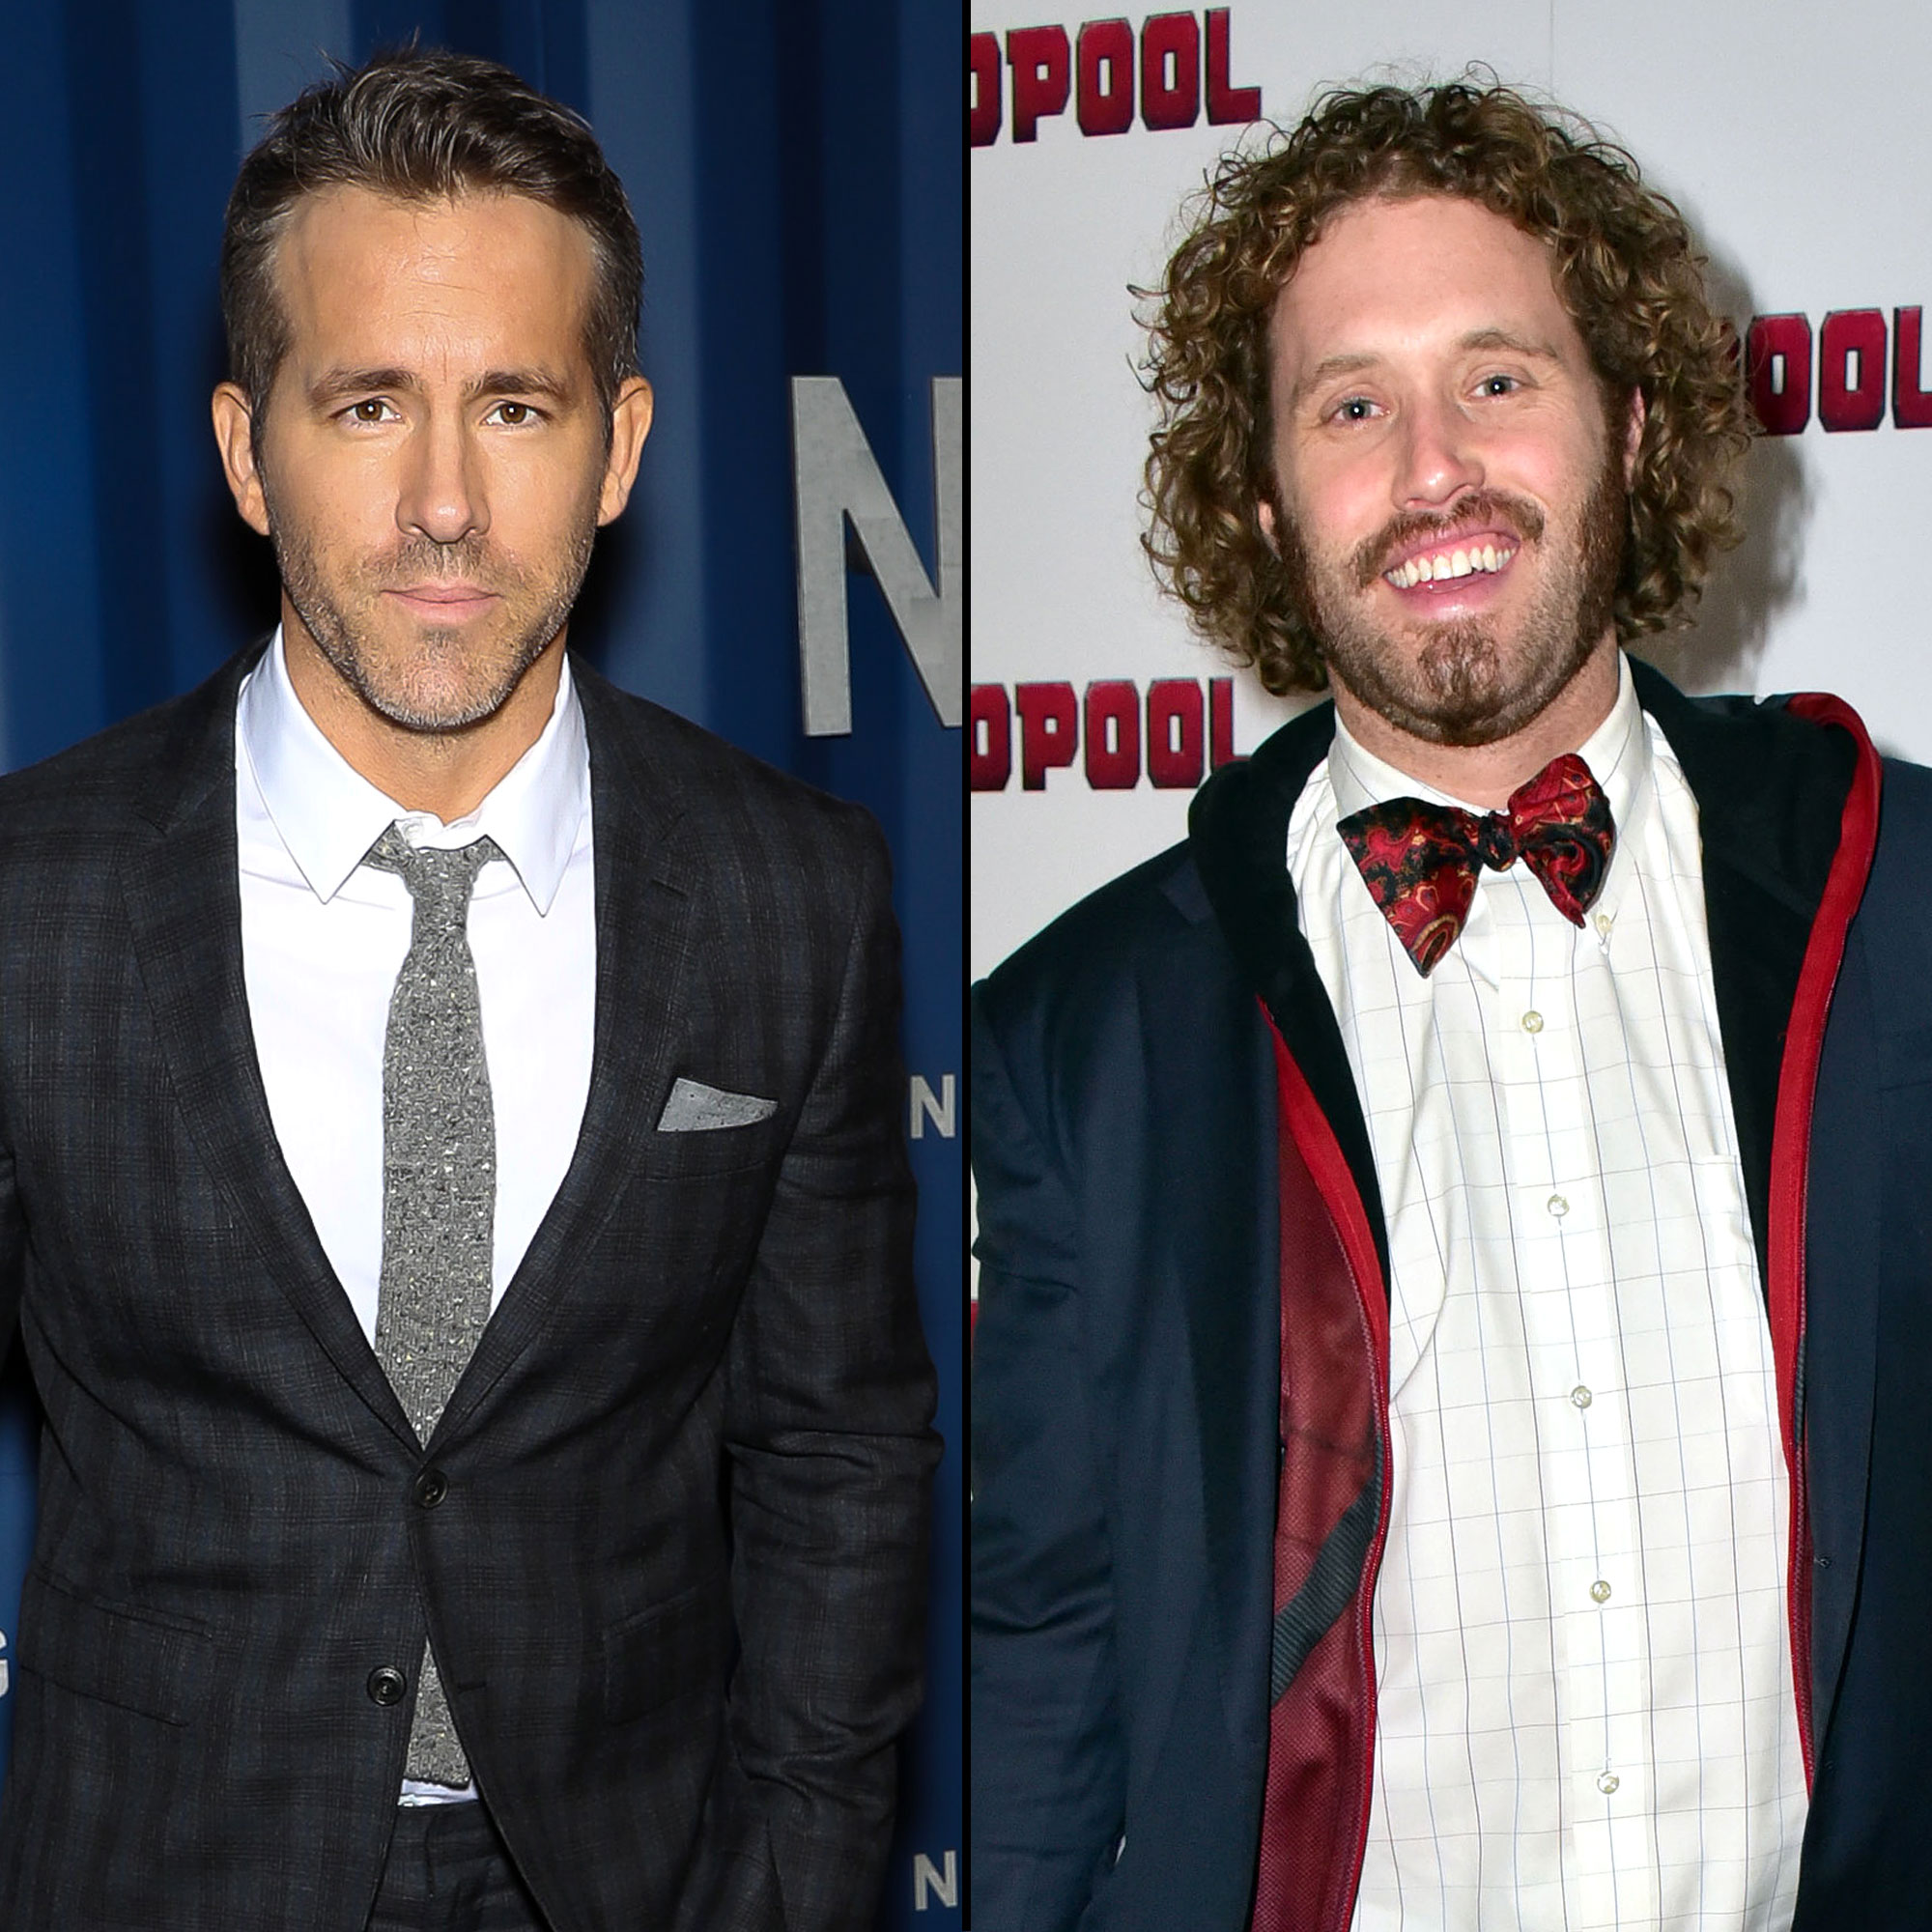 Deadpool 2 Actor Claims Ryan Reynolds Was 'Horrifically Mean' to Him